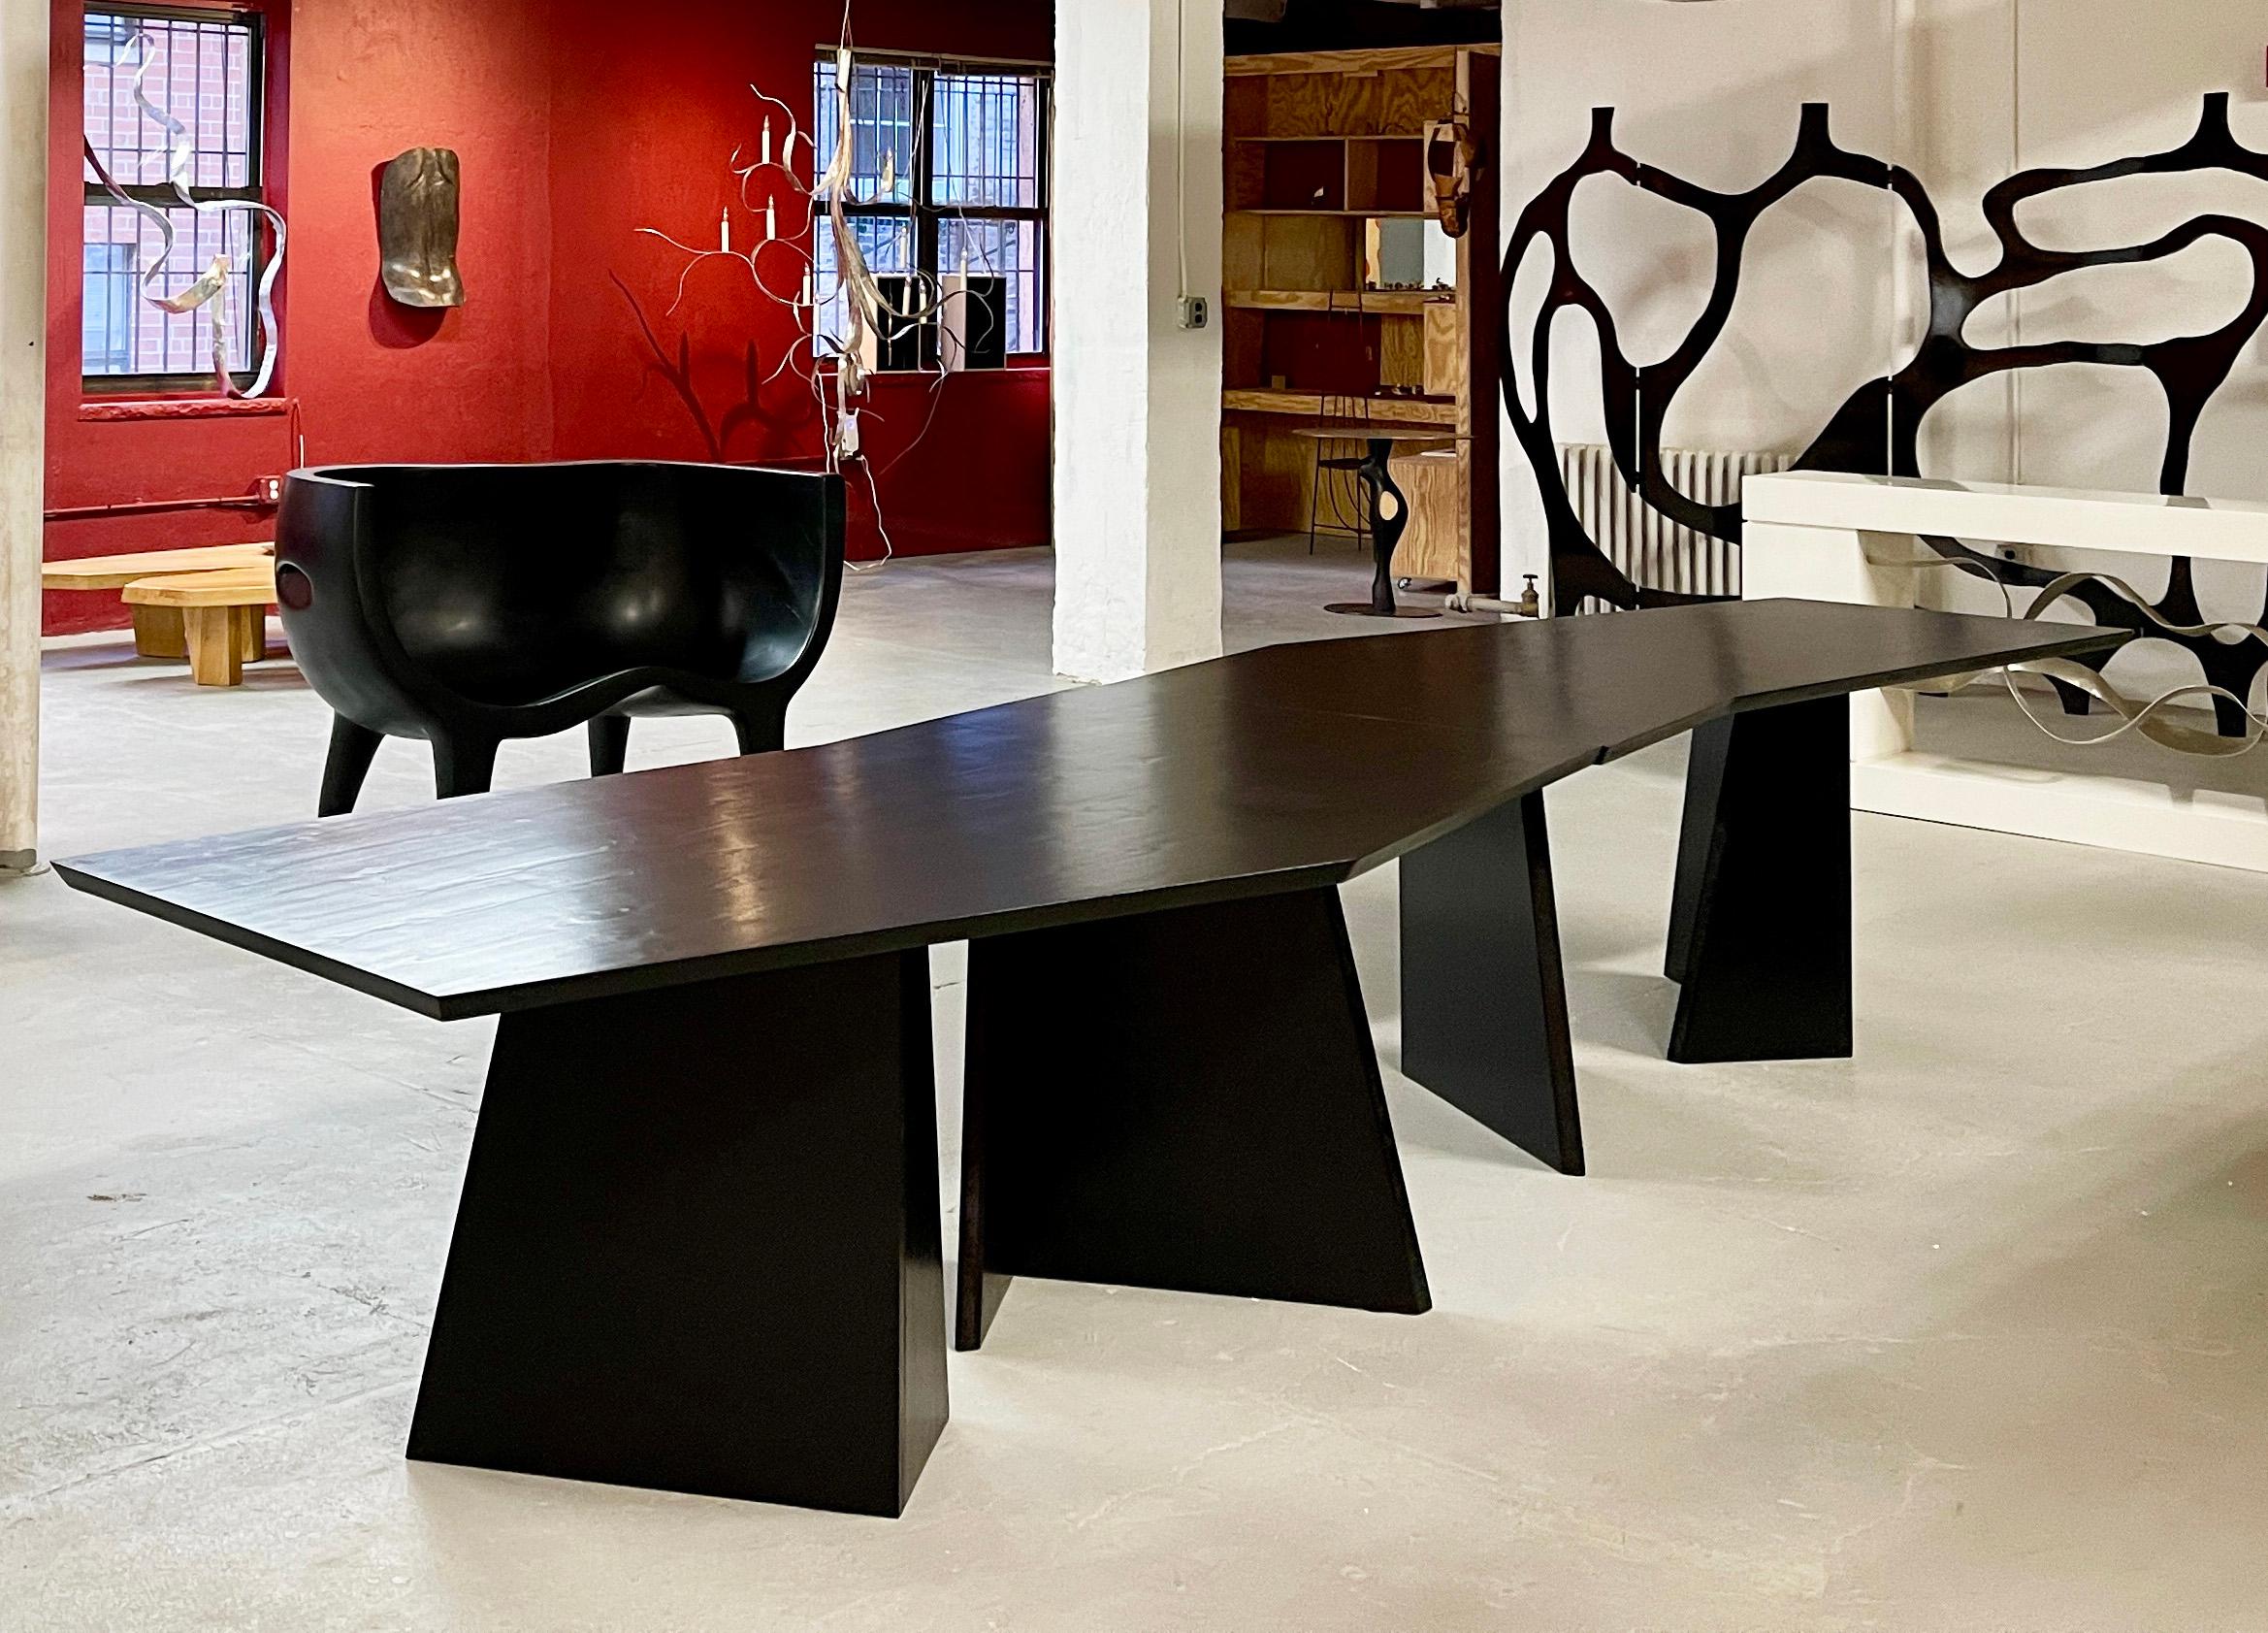 Sculptural  dining table in two sections, each 7 feet long, that can be joined together or used separately as needed.
One table can also be used as a desk. The angular legs and top give a sense of perpetual movement to the work as it animates its